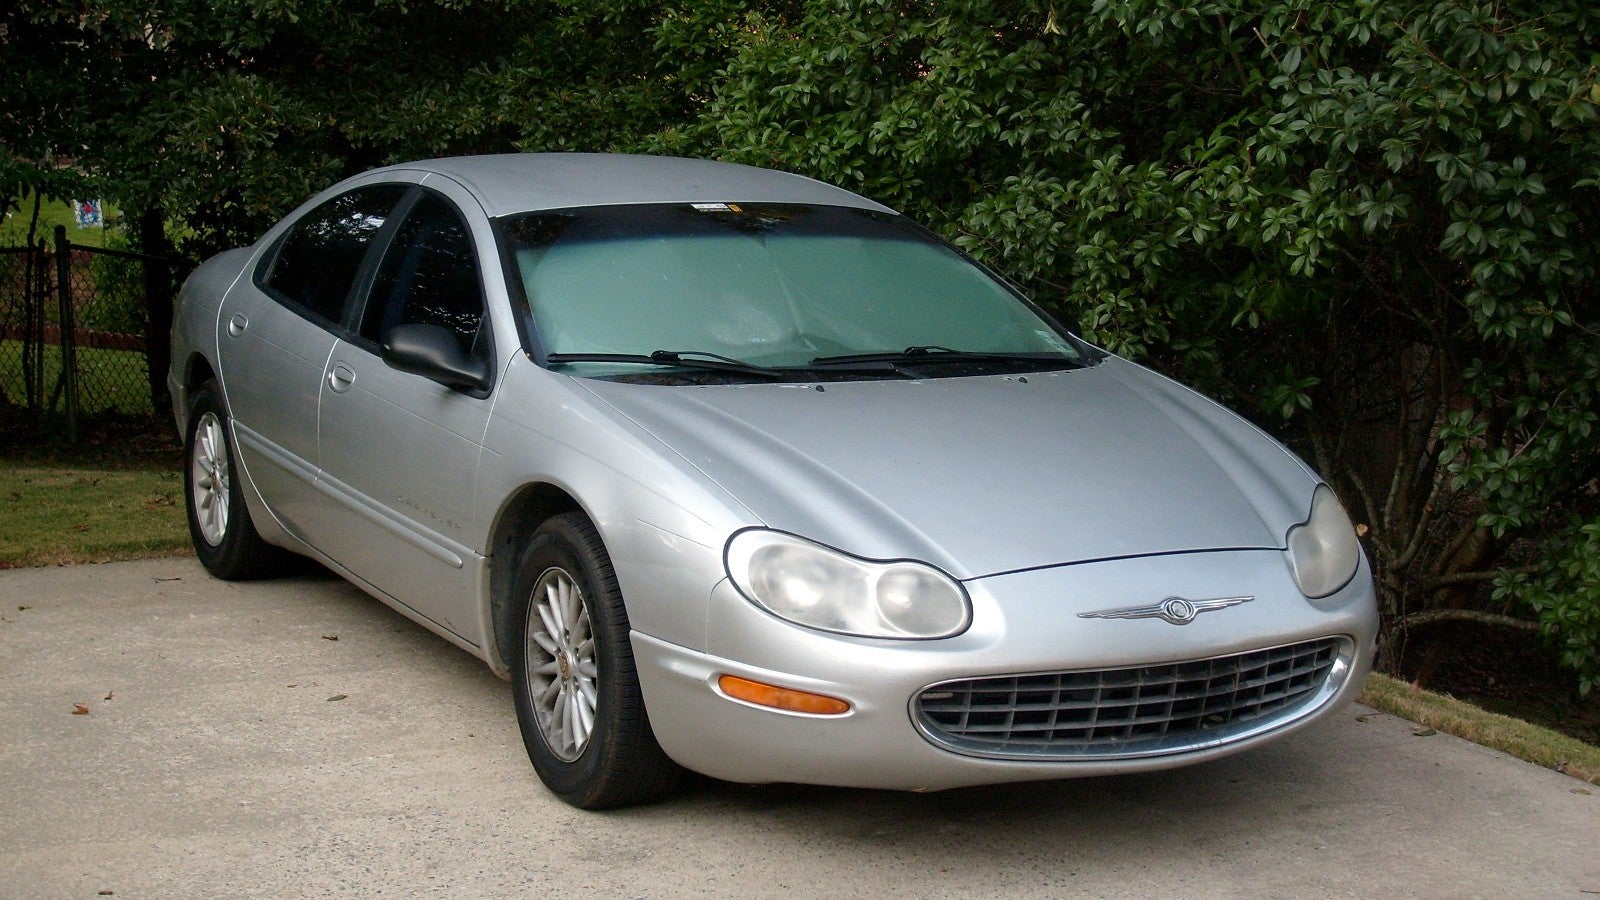 2000 Chrysler concord lxi #1